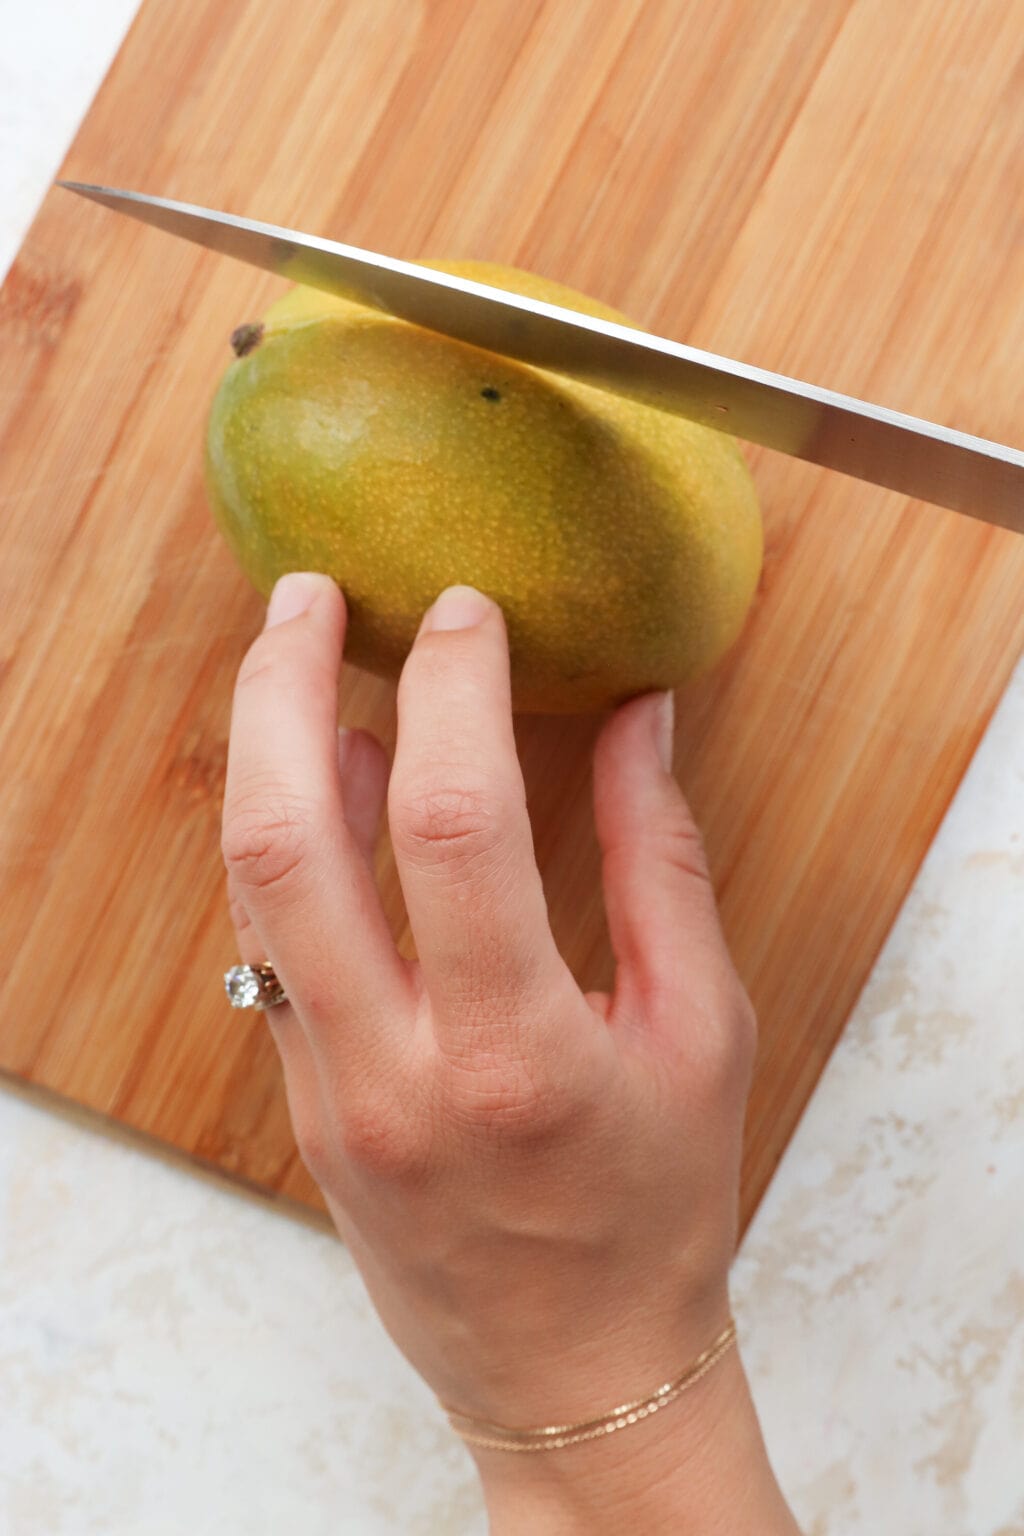 A mango that is green and yellow in color is on a  wooden cutting board. A chef's knife is cutting into theand a woman's hand is holding the mango. 